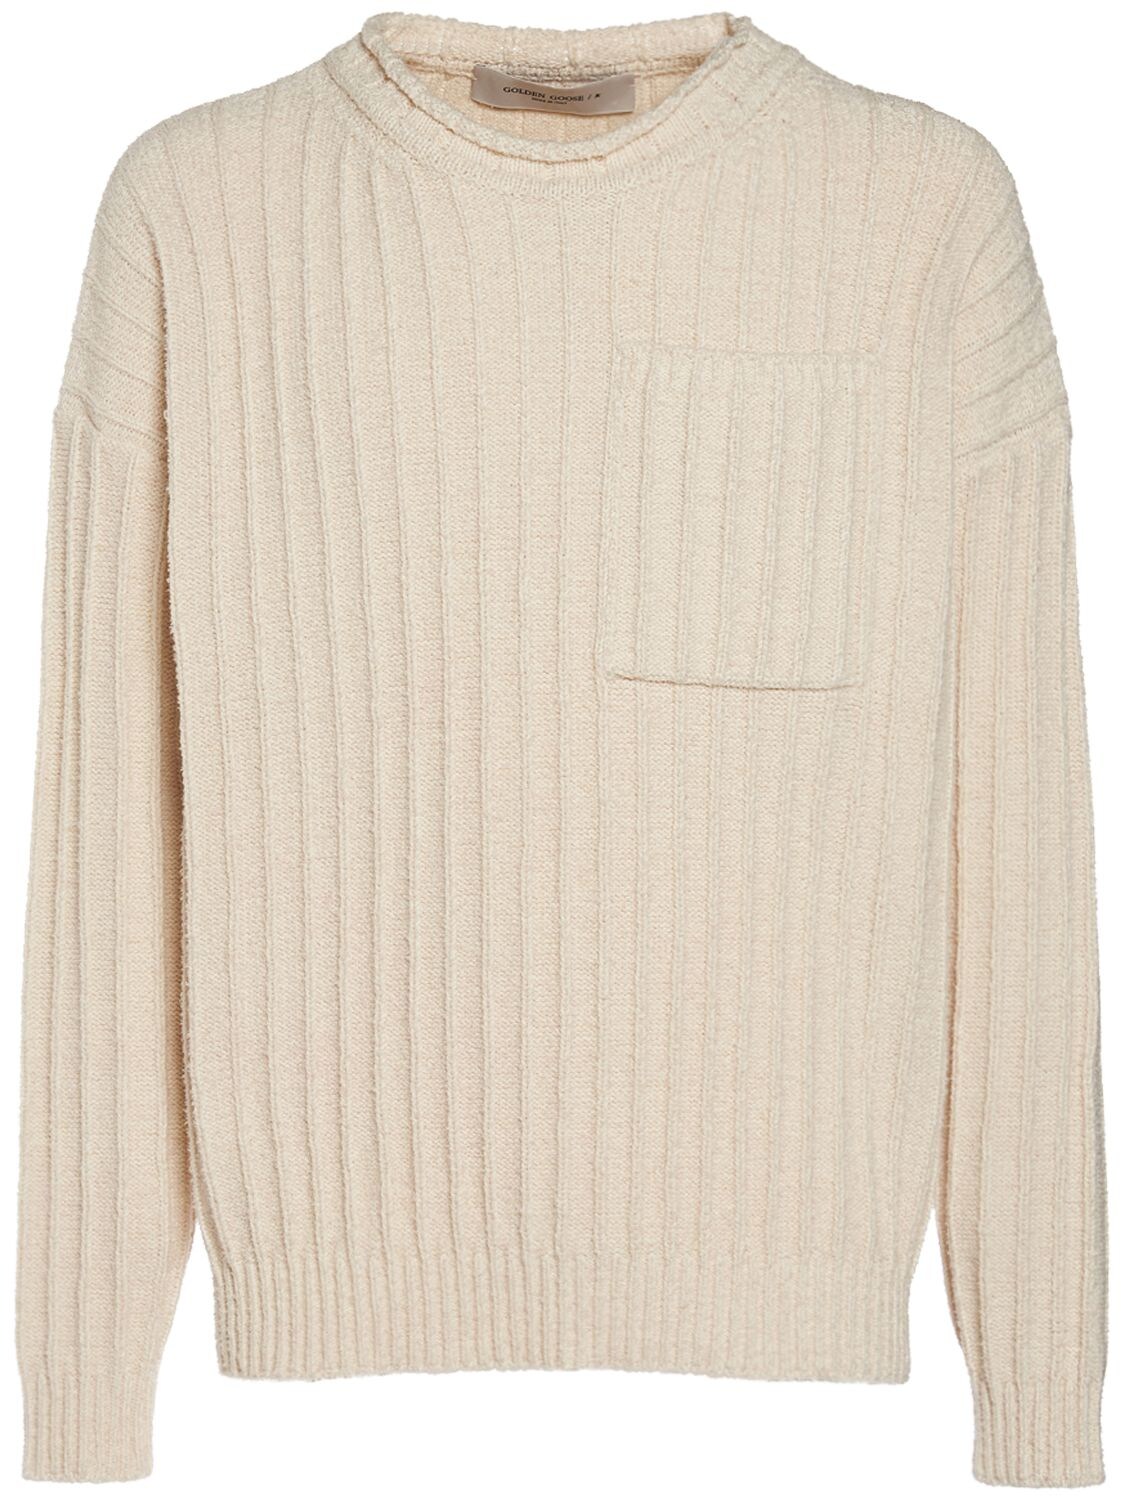 GOLDEN GOOSE BOXY COTTON KNIT SWEATER